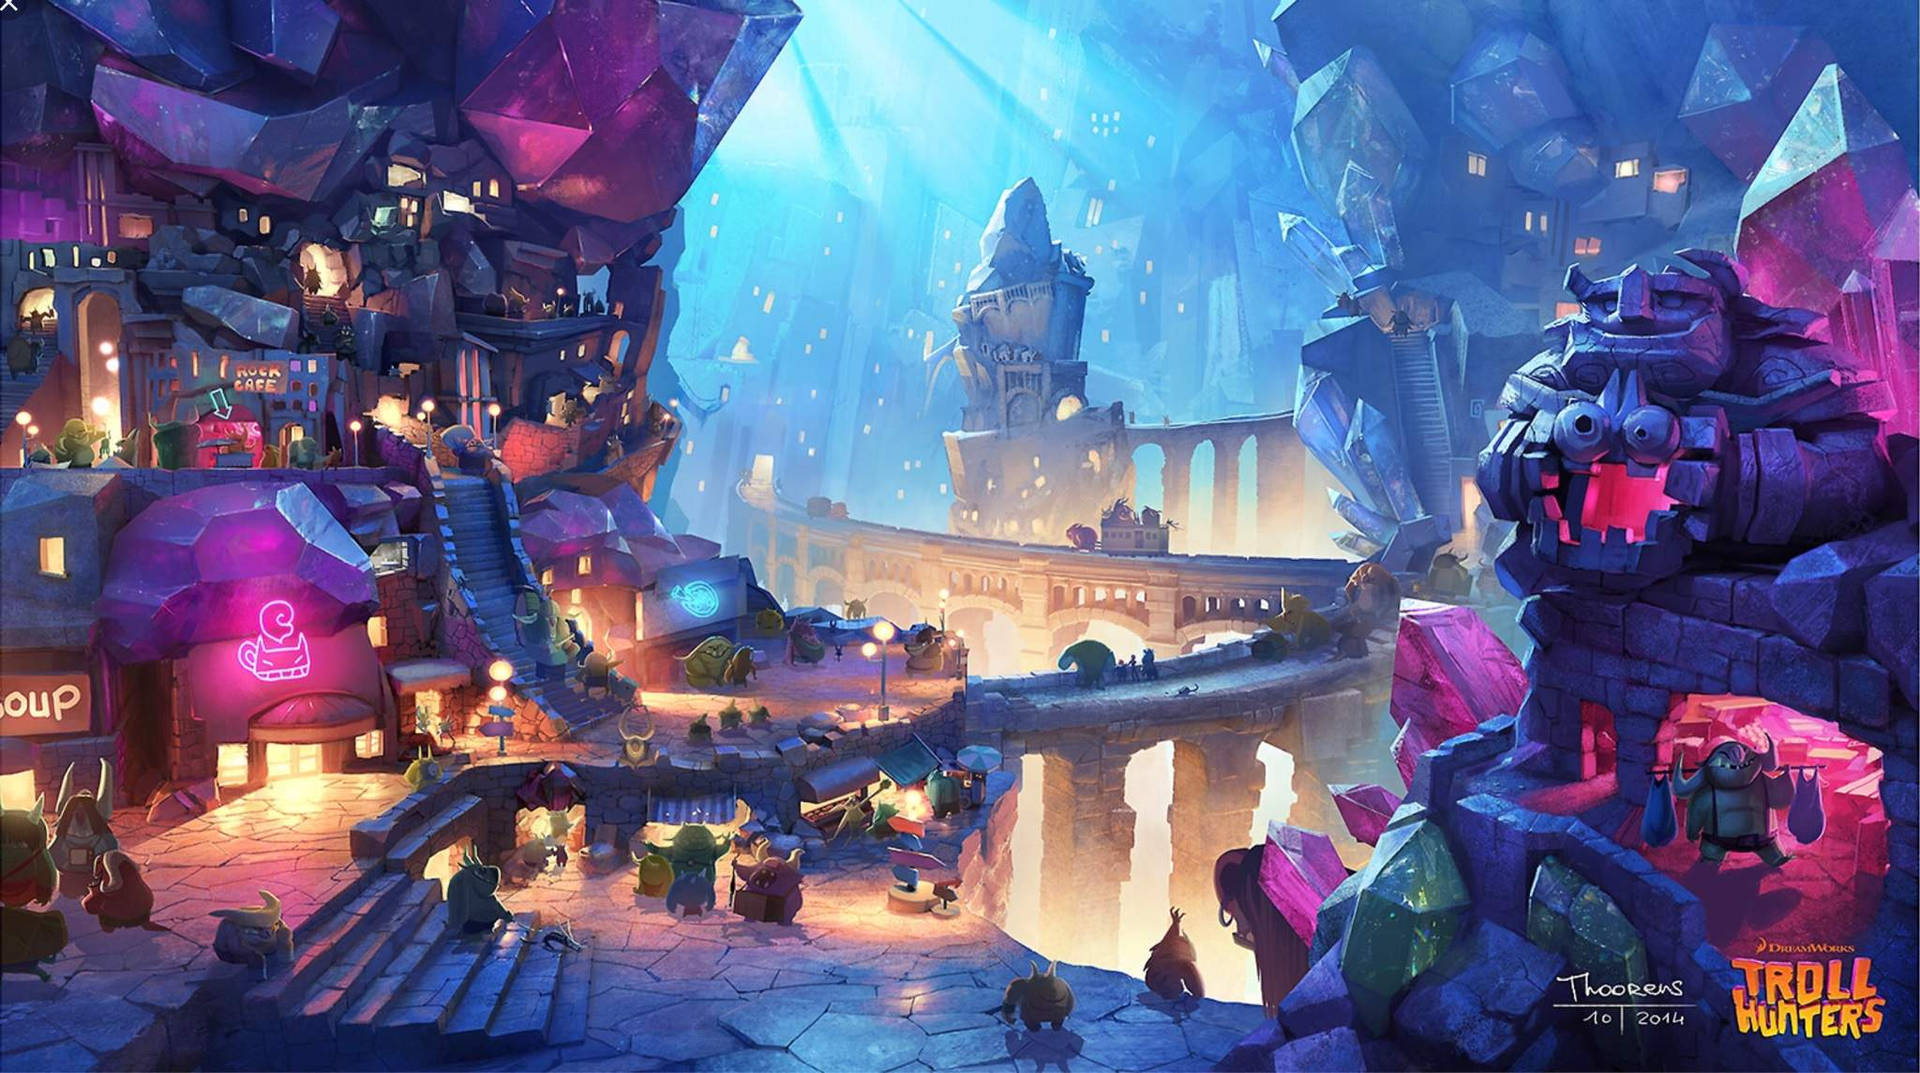 Trollhunters Tales Of Arcadia City Background